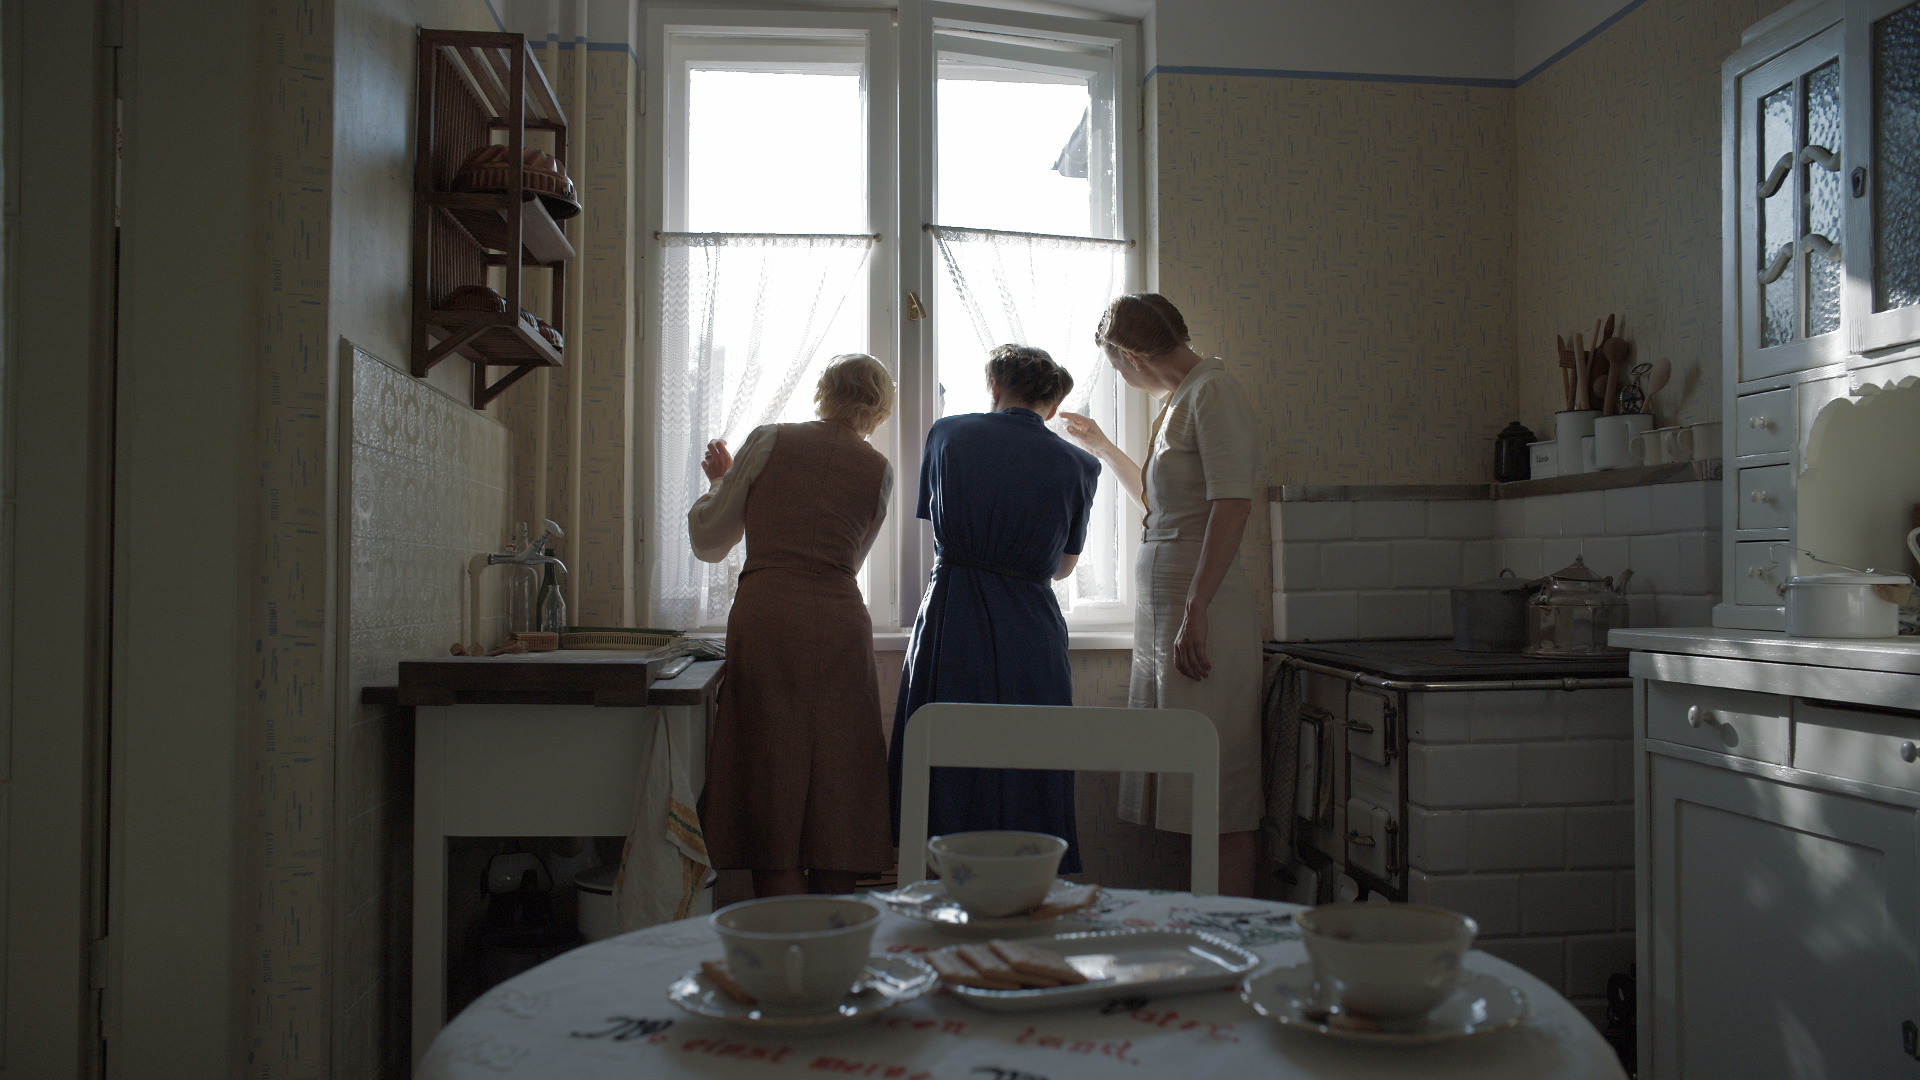 Three women look out through curtains in a kitchen